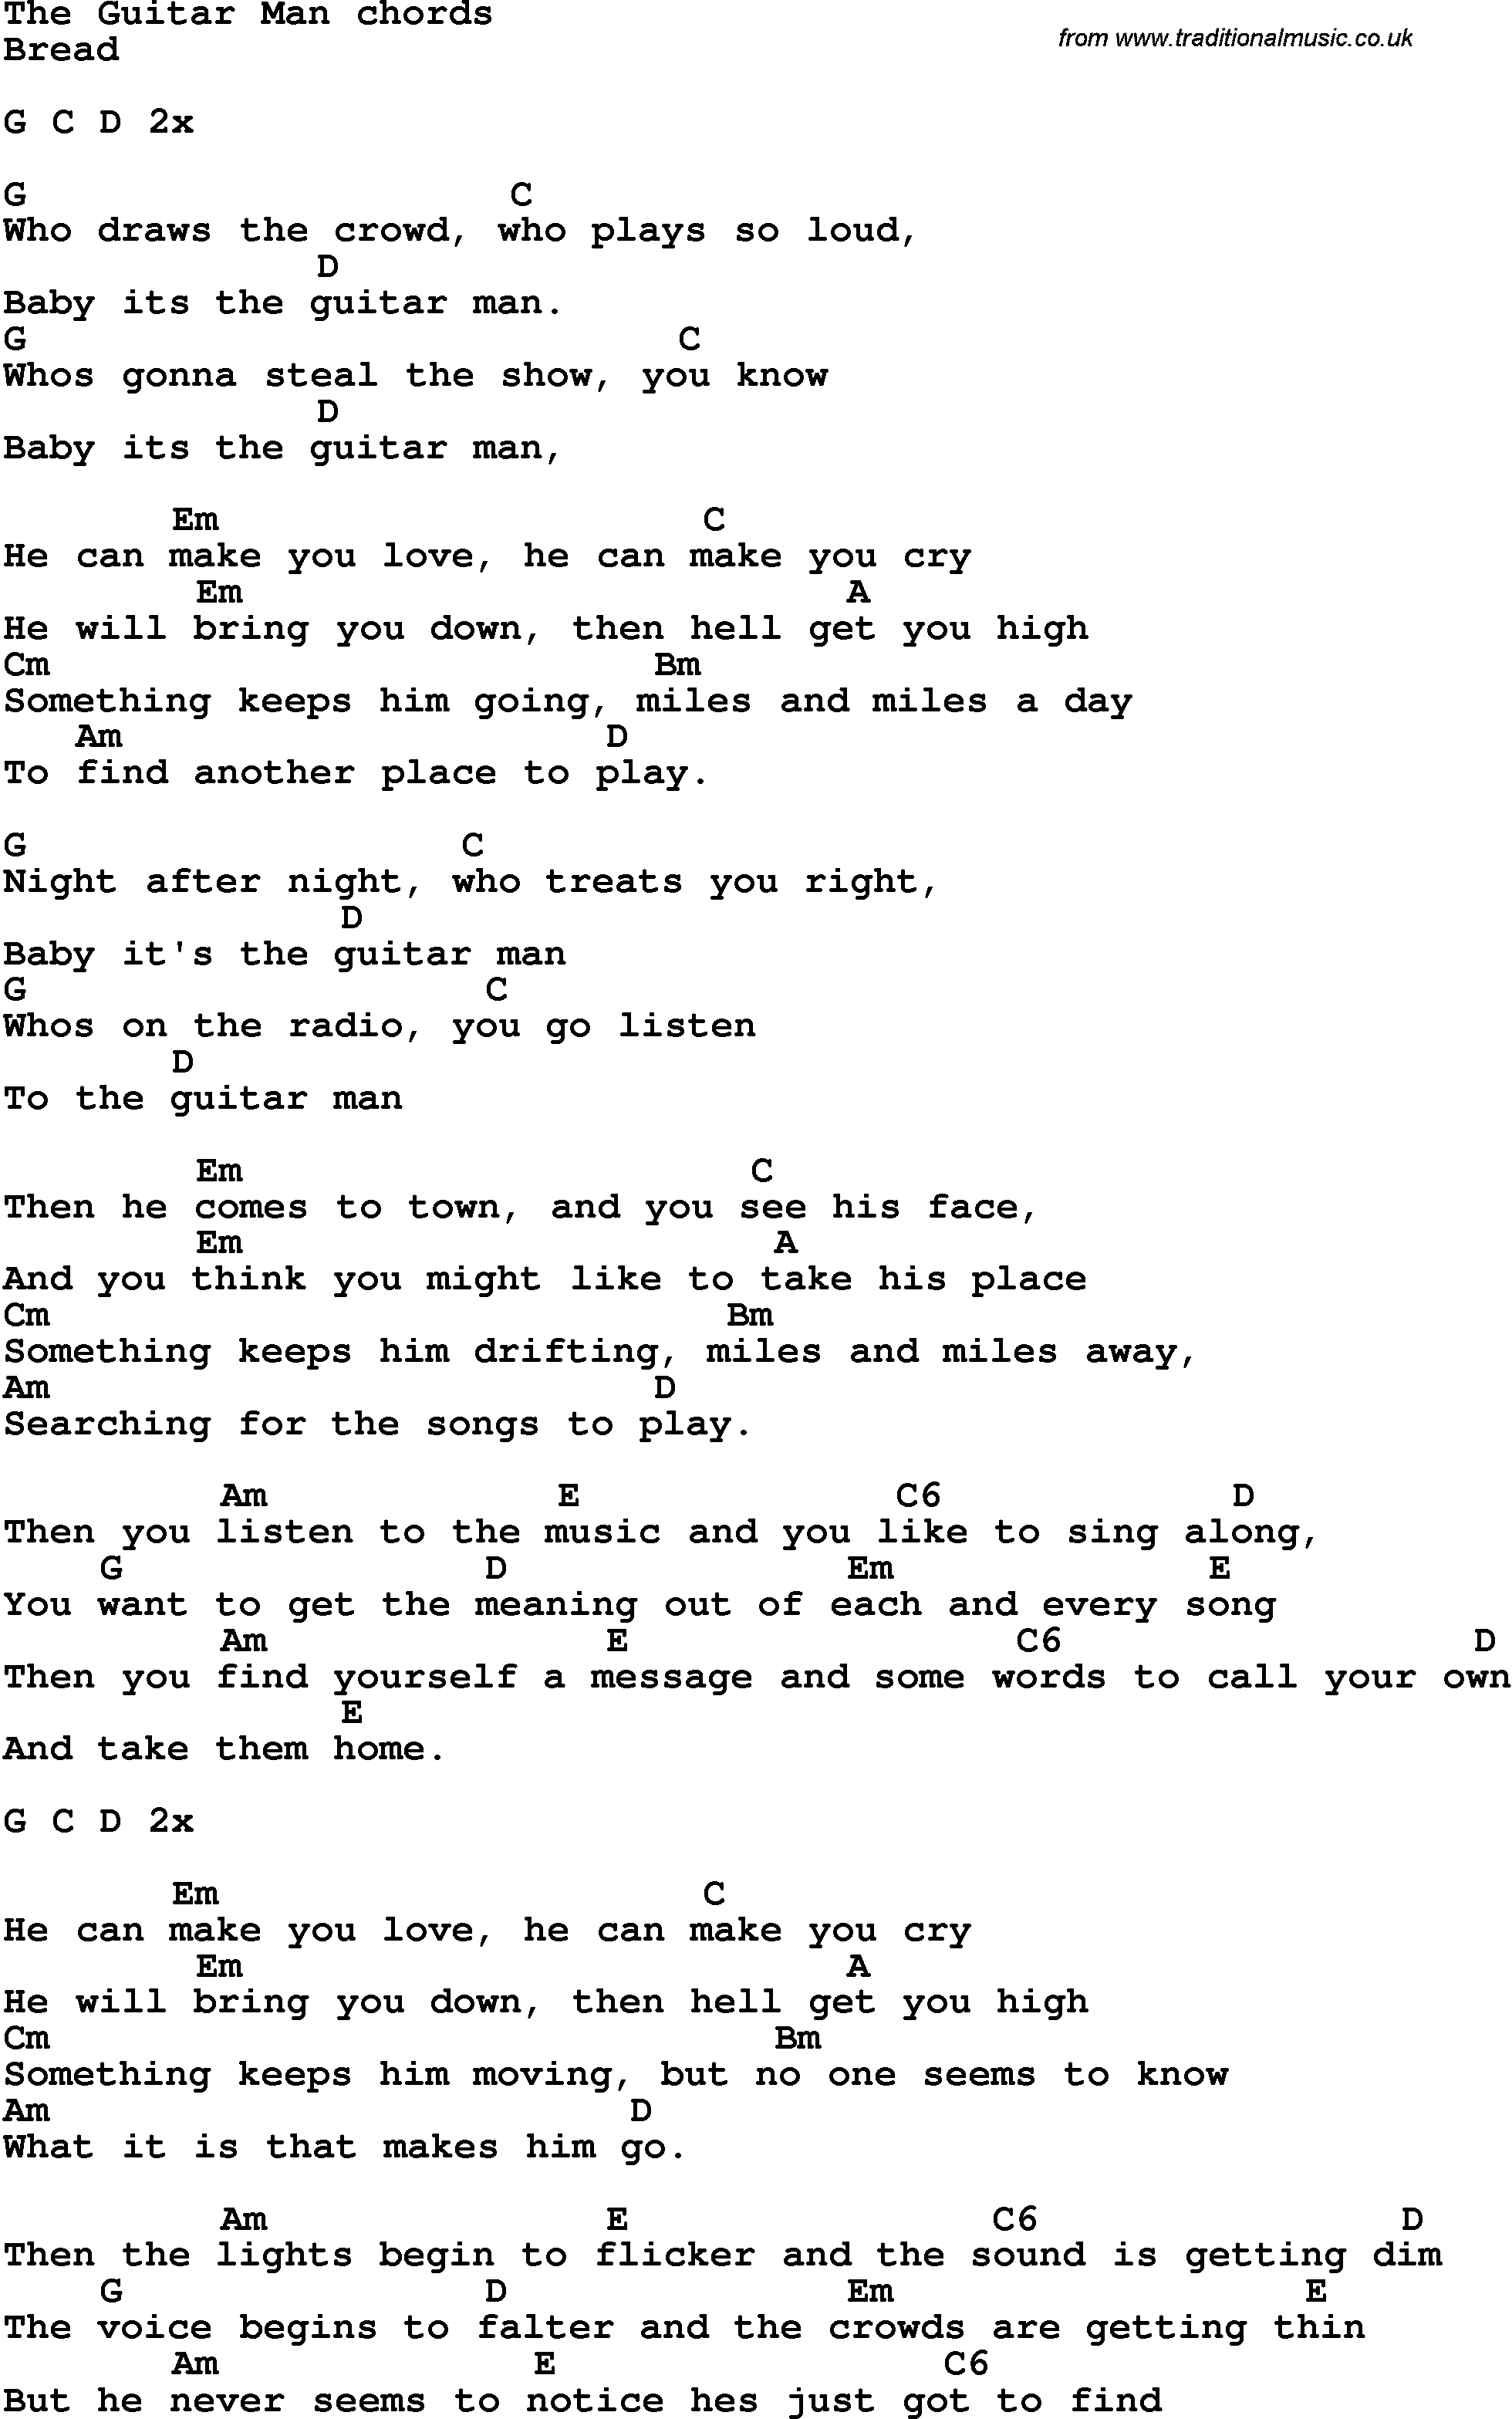 Song Lyrics with guitar chords for The Guitar Man